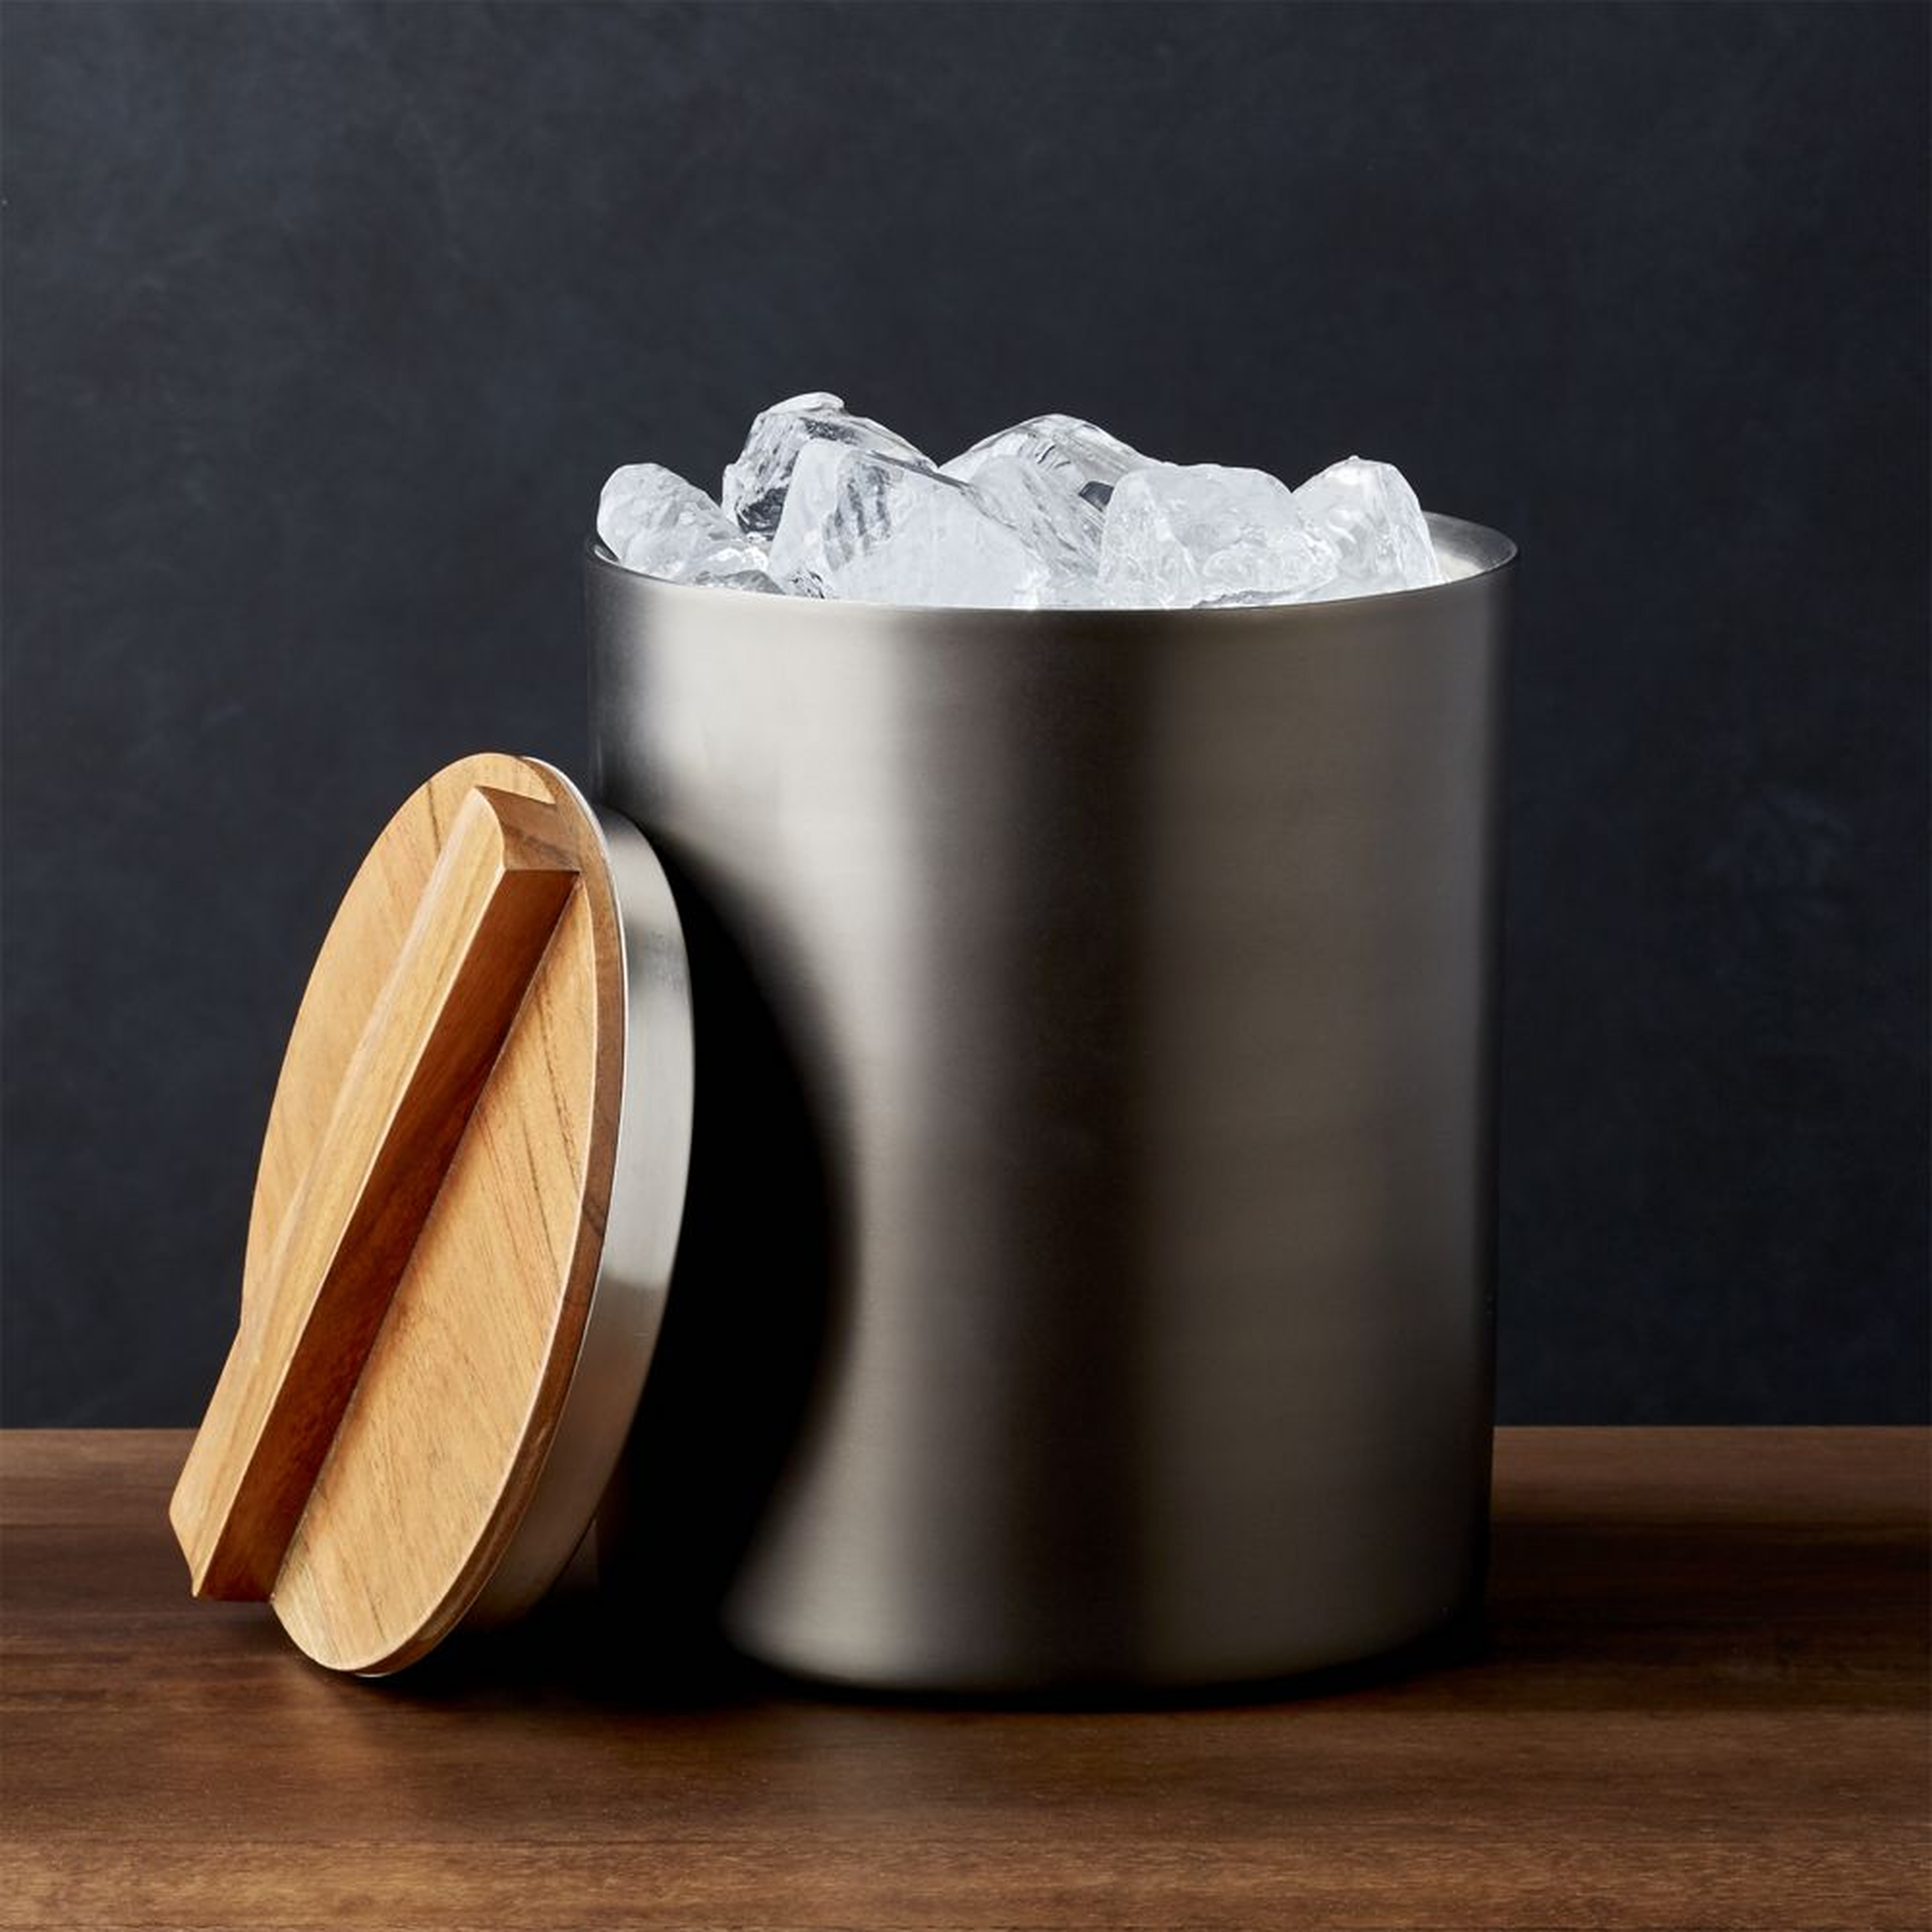 Fenton Graphite and Wood Ice Bucket - Crate and Barrel